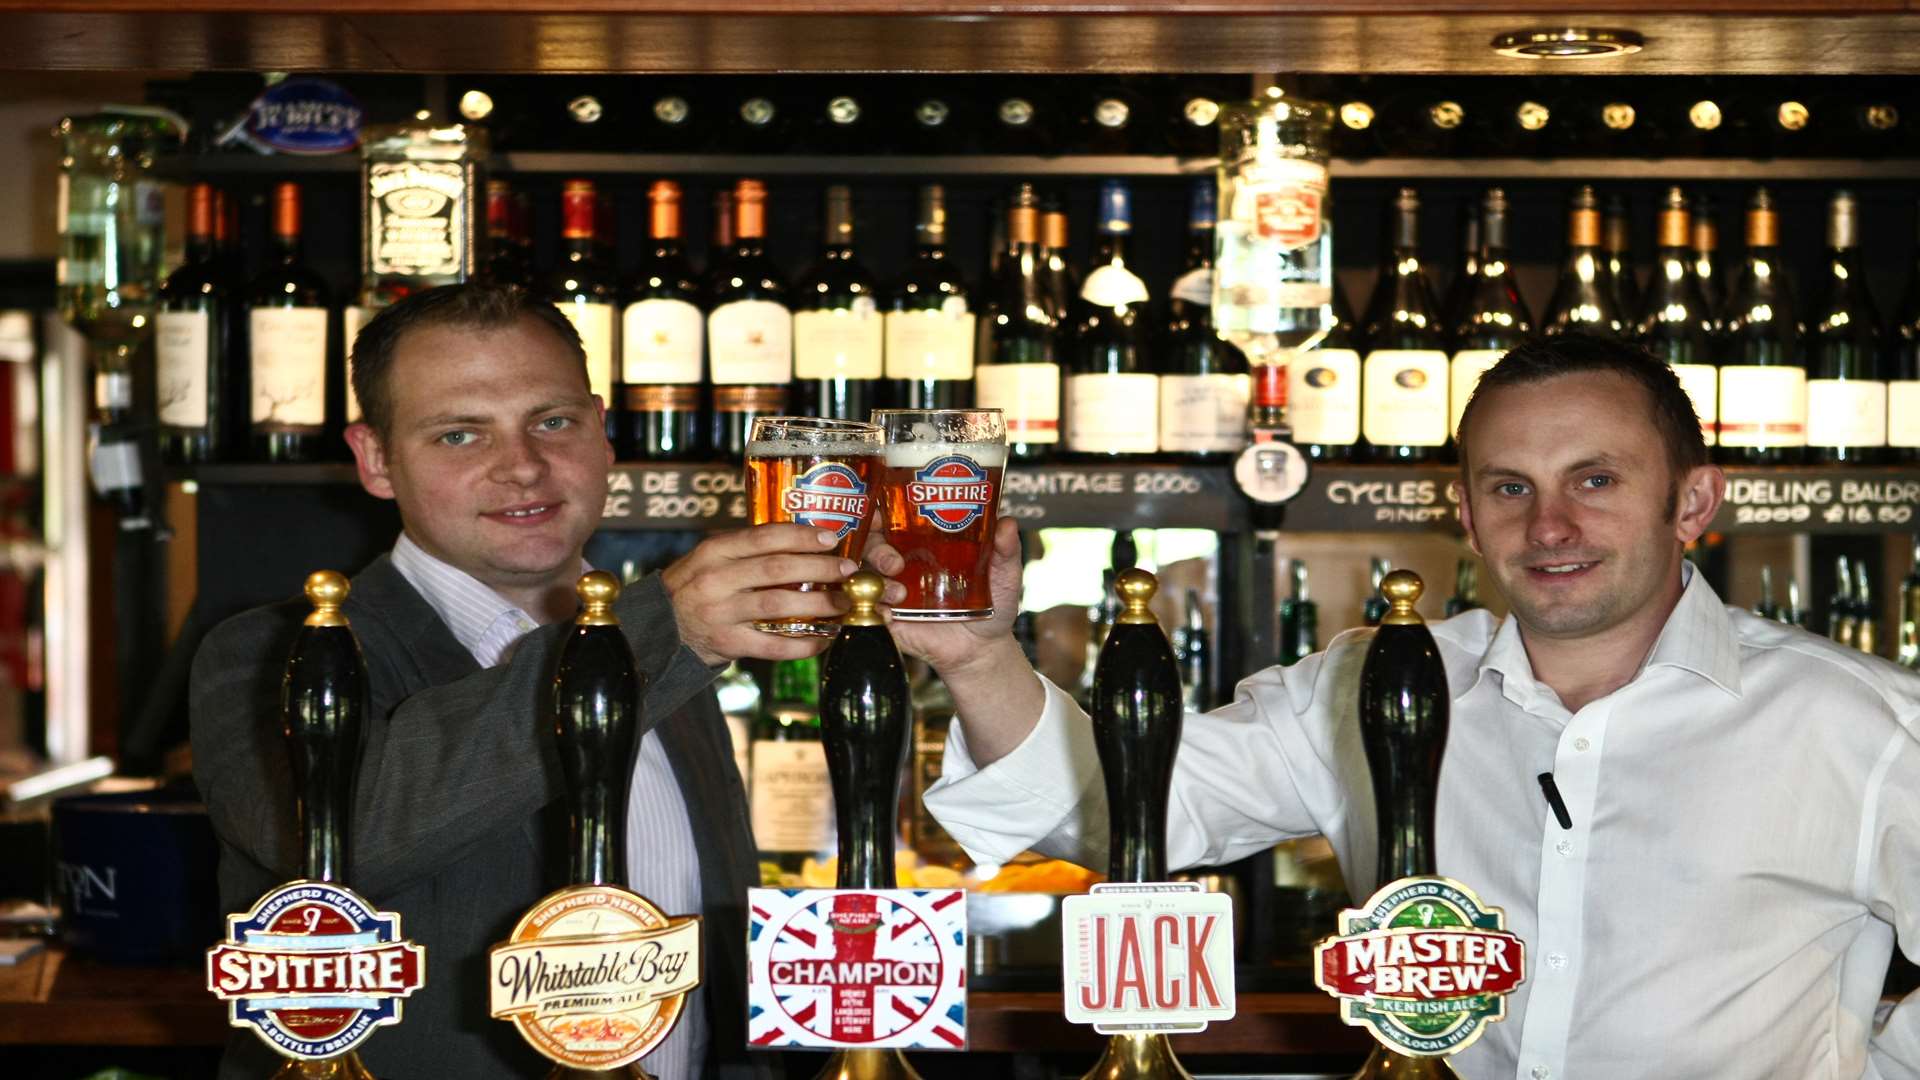 Gareth Finney and Daniel Sidders, who also own the Albion and a number of pubs in Canterbury, will be taking over the Chimney Boy.